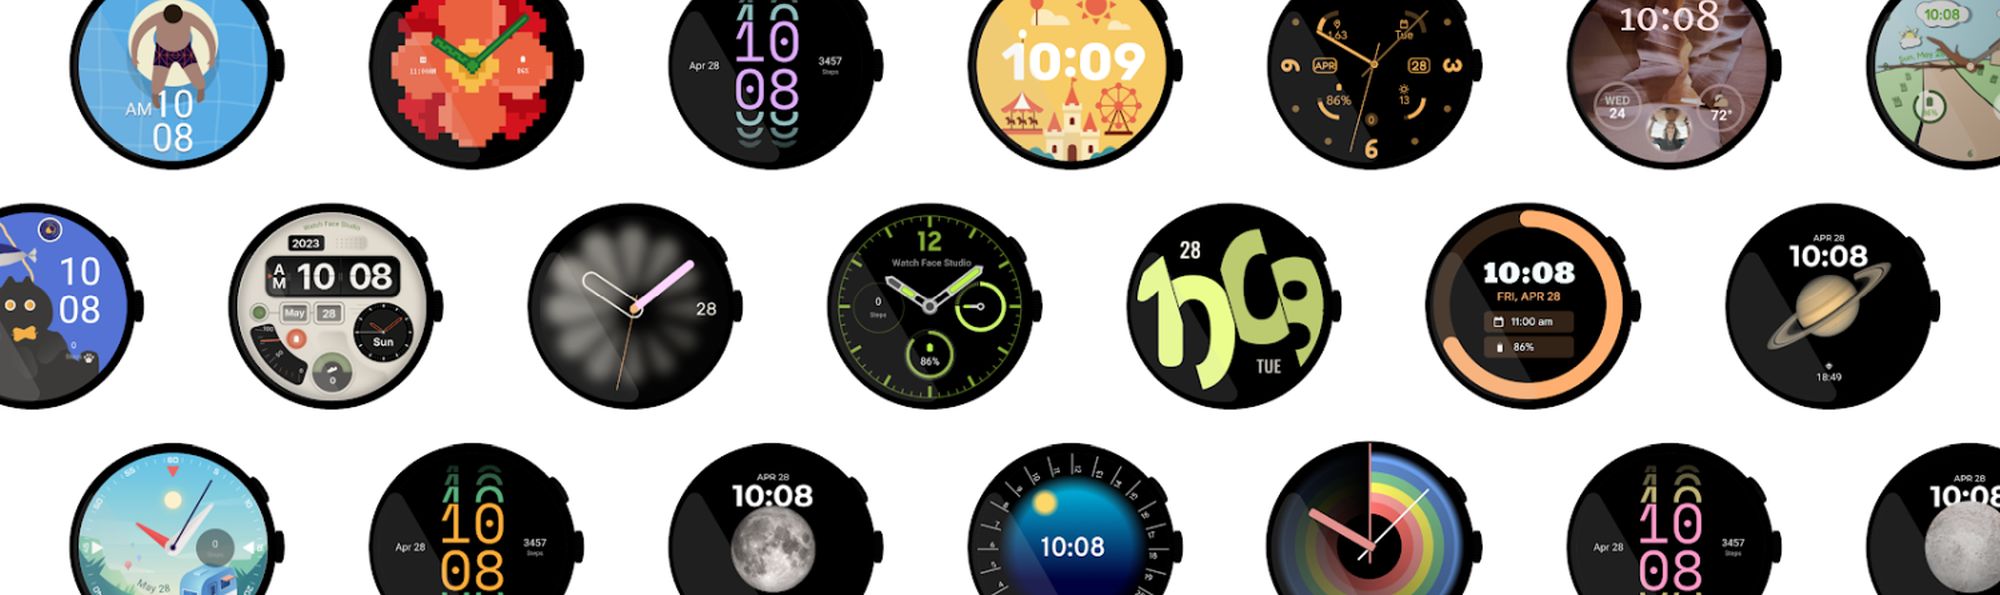 wear os watch faces